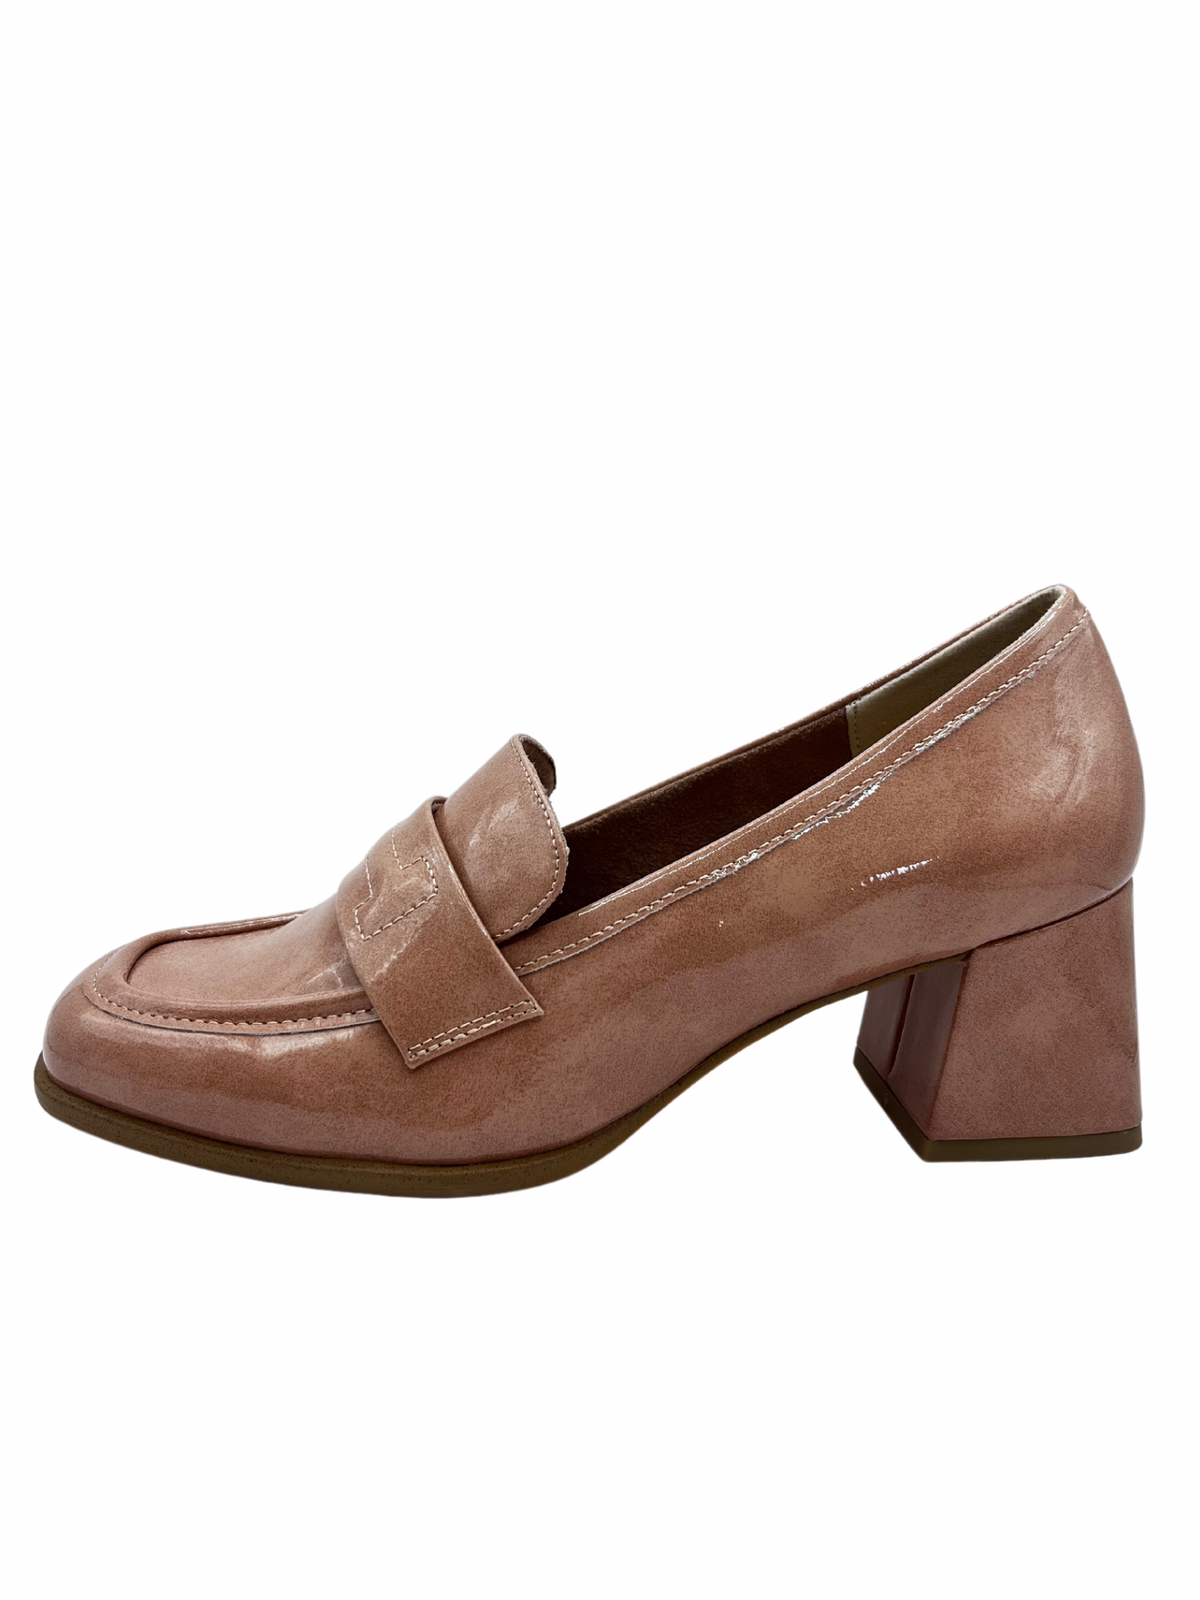 Marco Tozzi Rose Patent Heeled Loafer